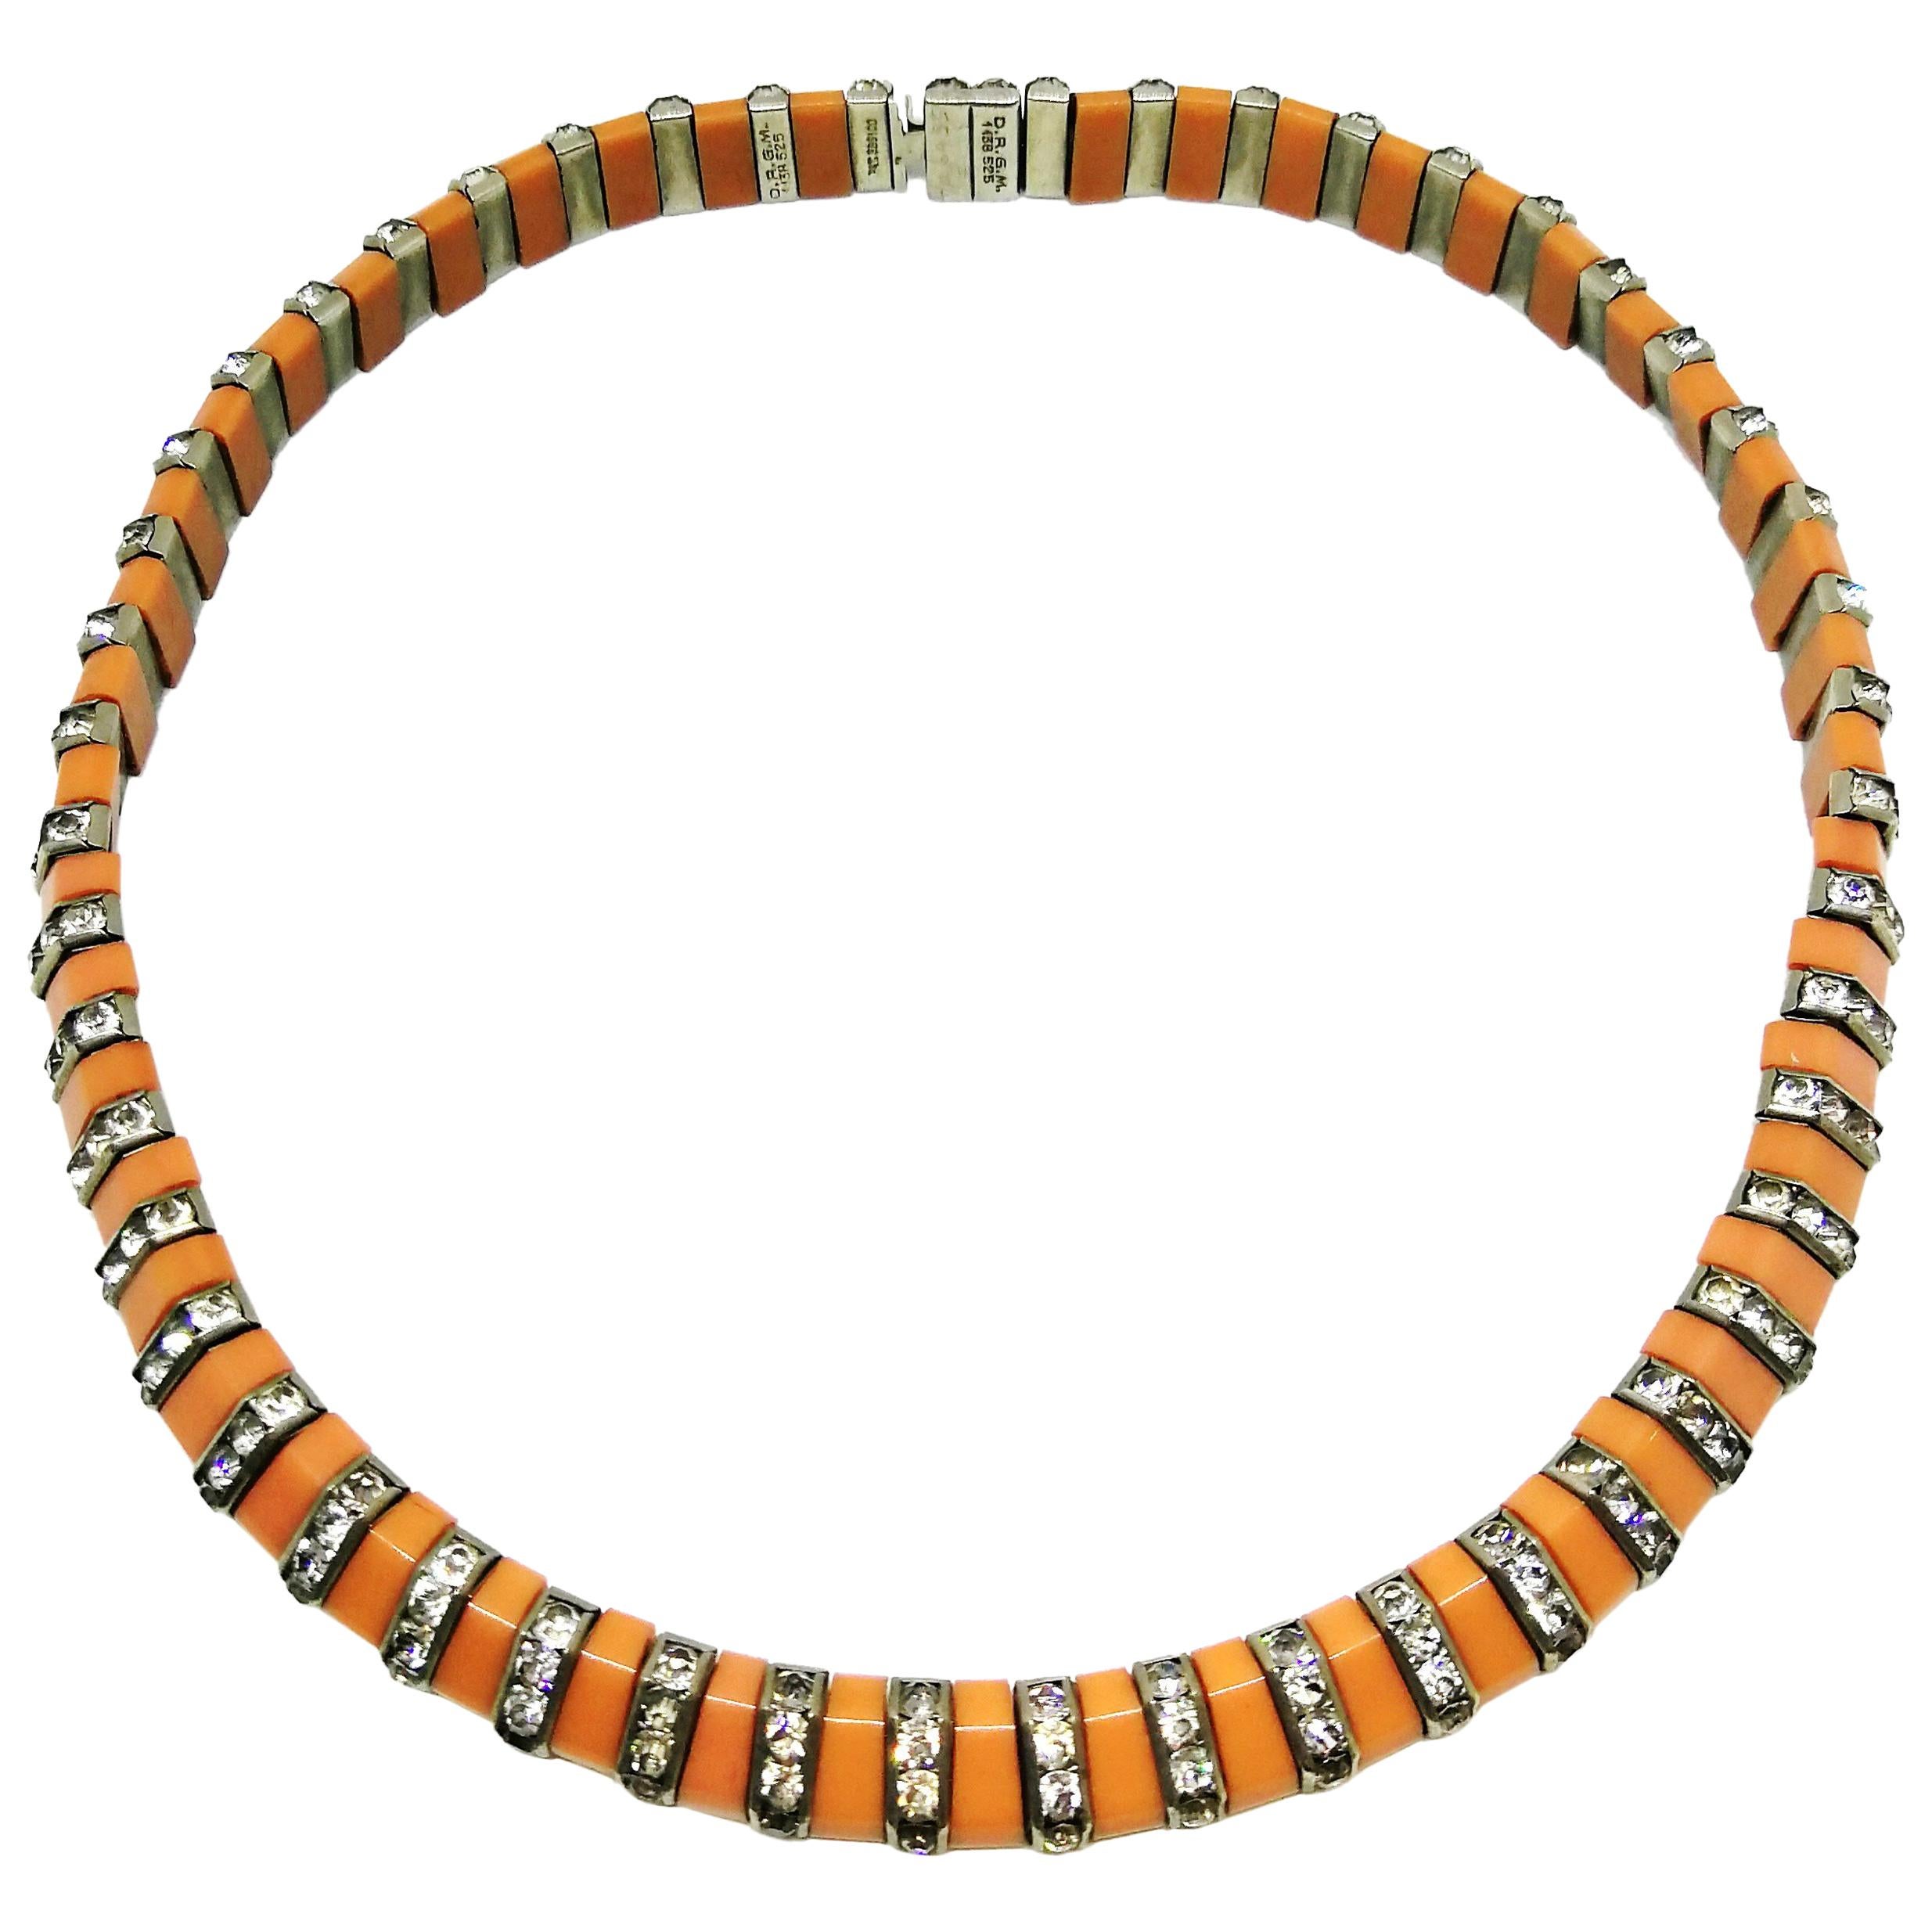 D.R.G.M soft salmon pink Bakelite and paste necklace, Germany 1930s